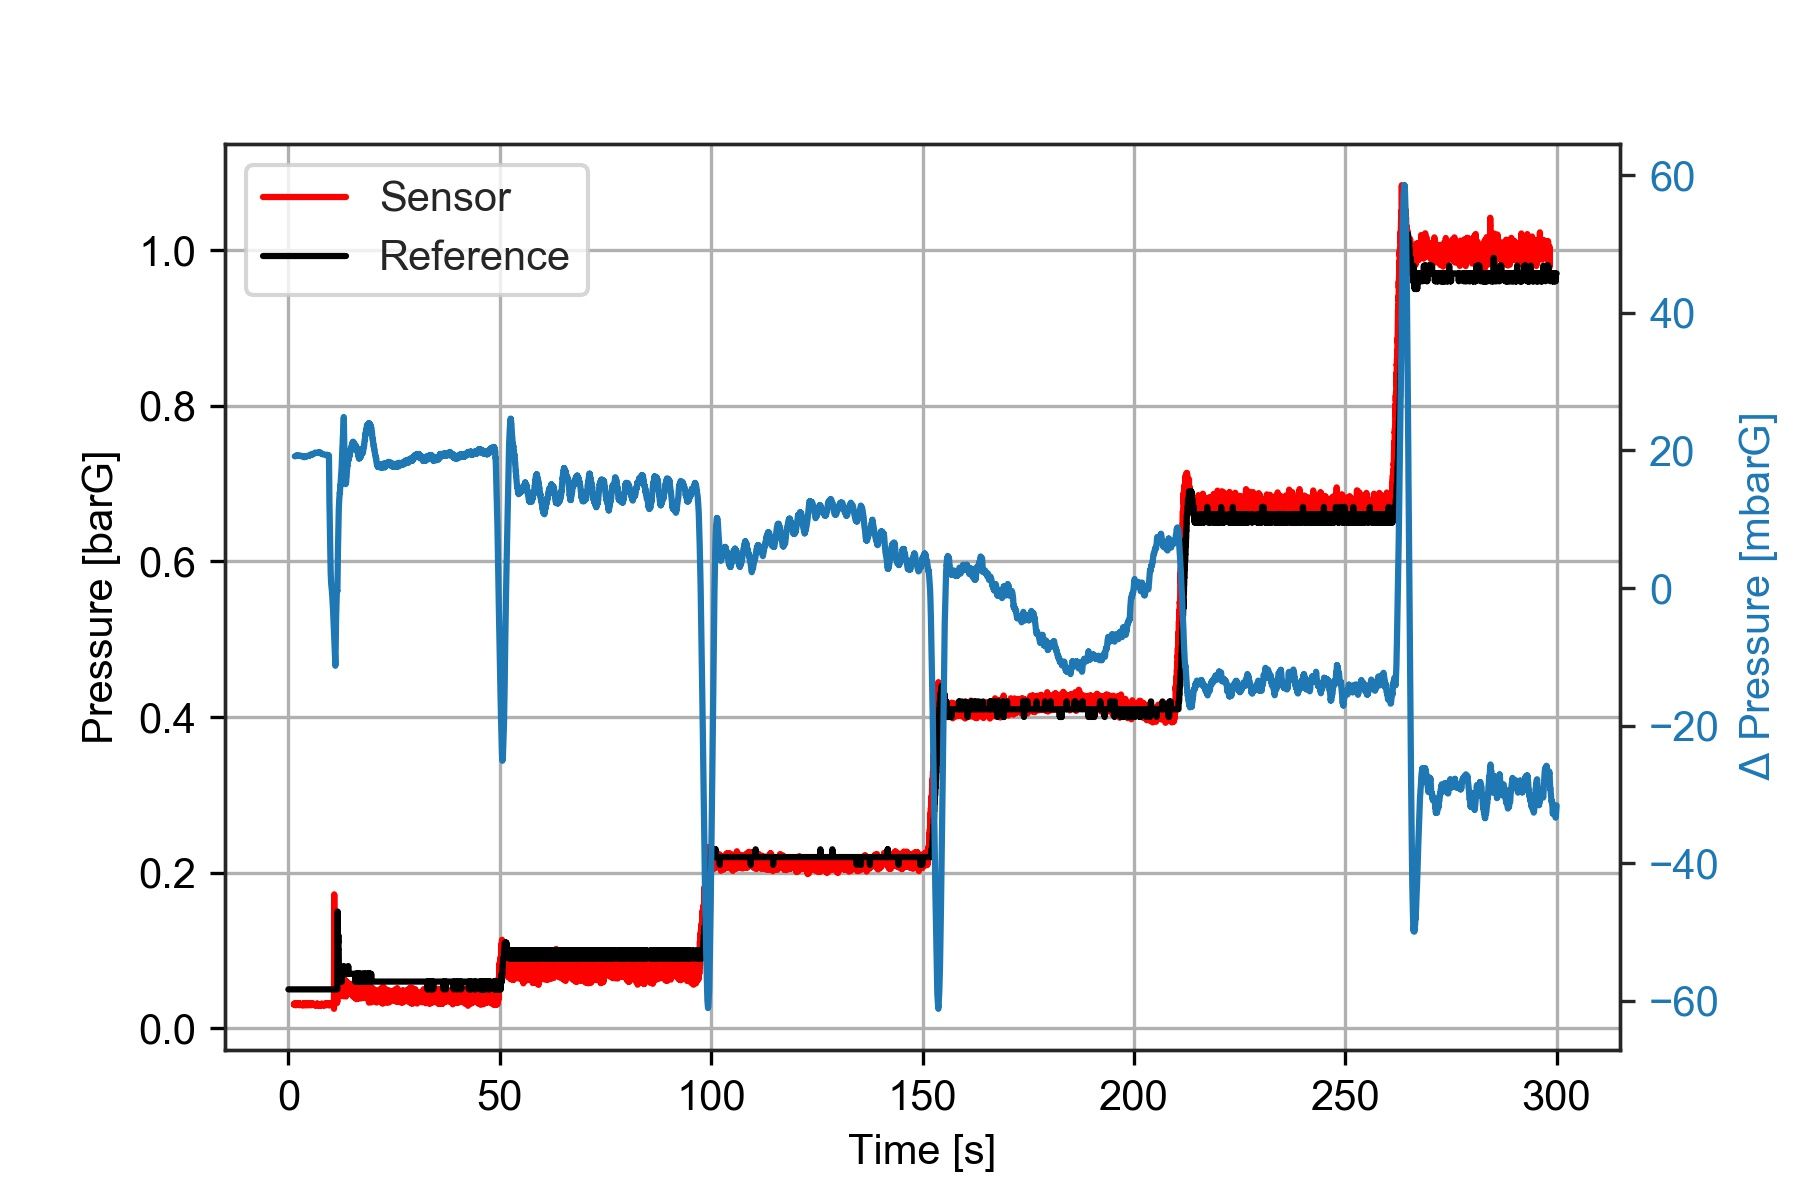 Plot of the pressure values vs time, as recorded during the test. The reference values are represented in black, and the sensor measurements are shown in red, both in barG. The test sequence is a sequence of steps with a variable duration. The difference is pressure between the reference and sensor is represented with the scale shown on the right side, in mbarG.